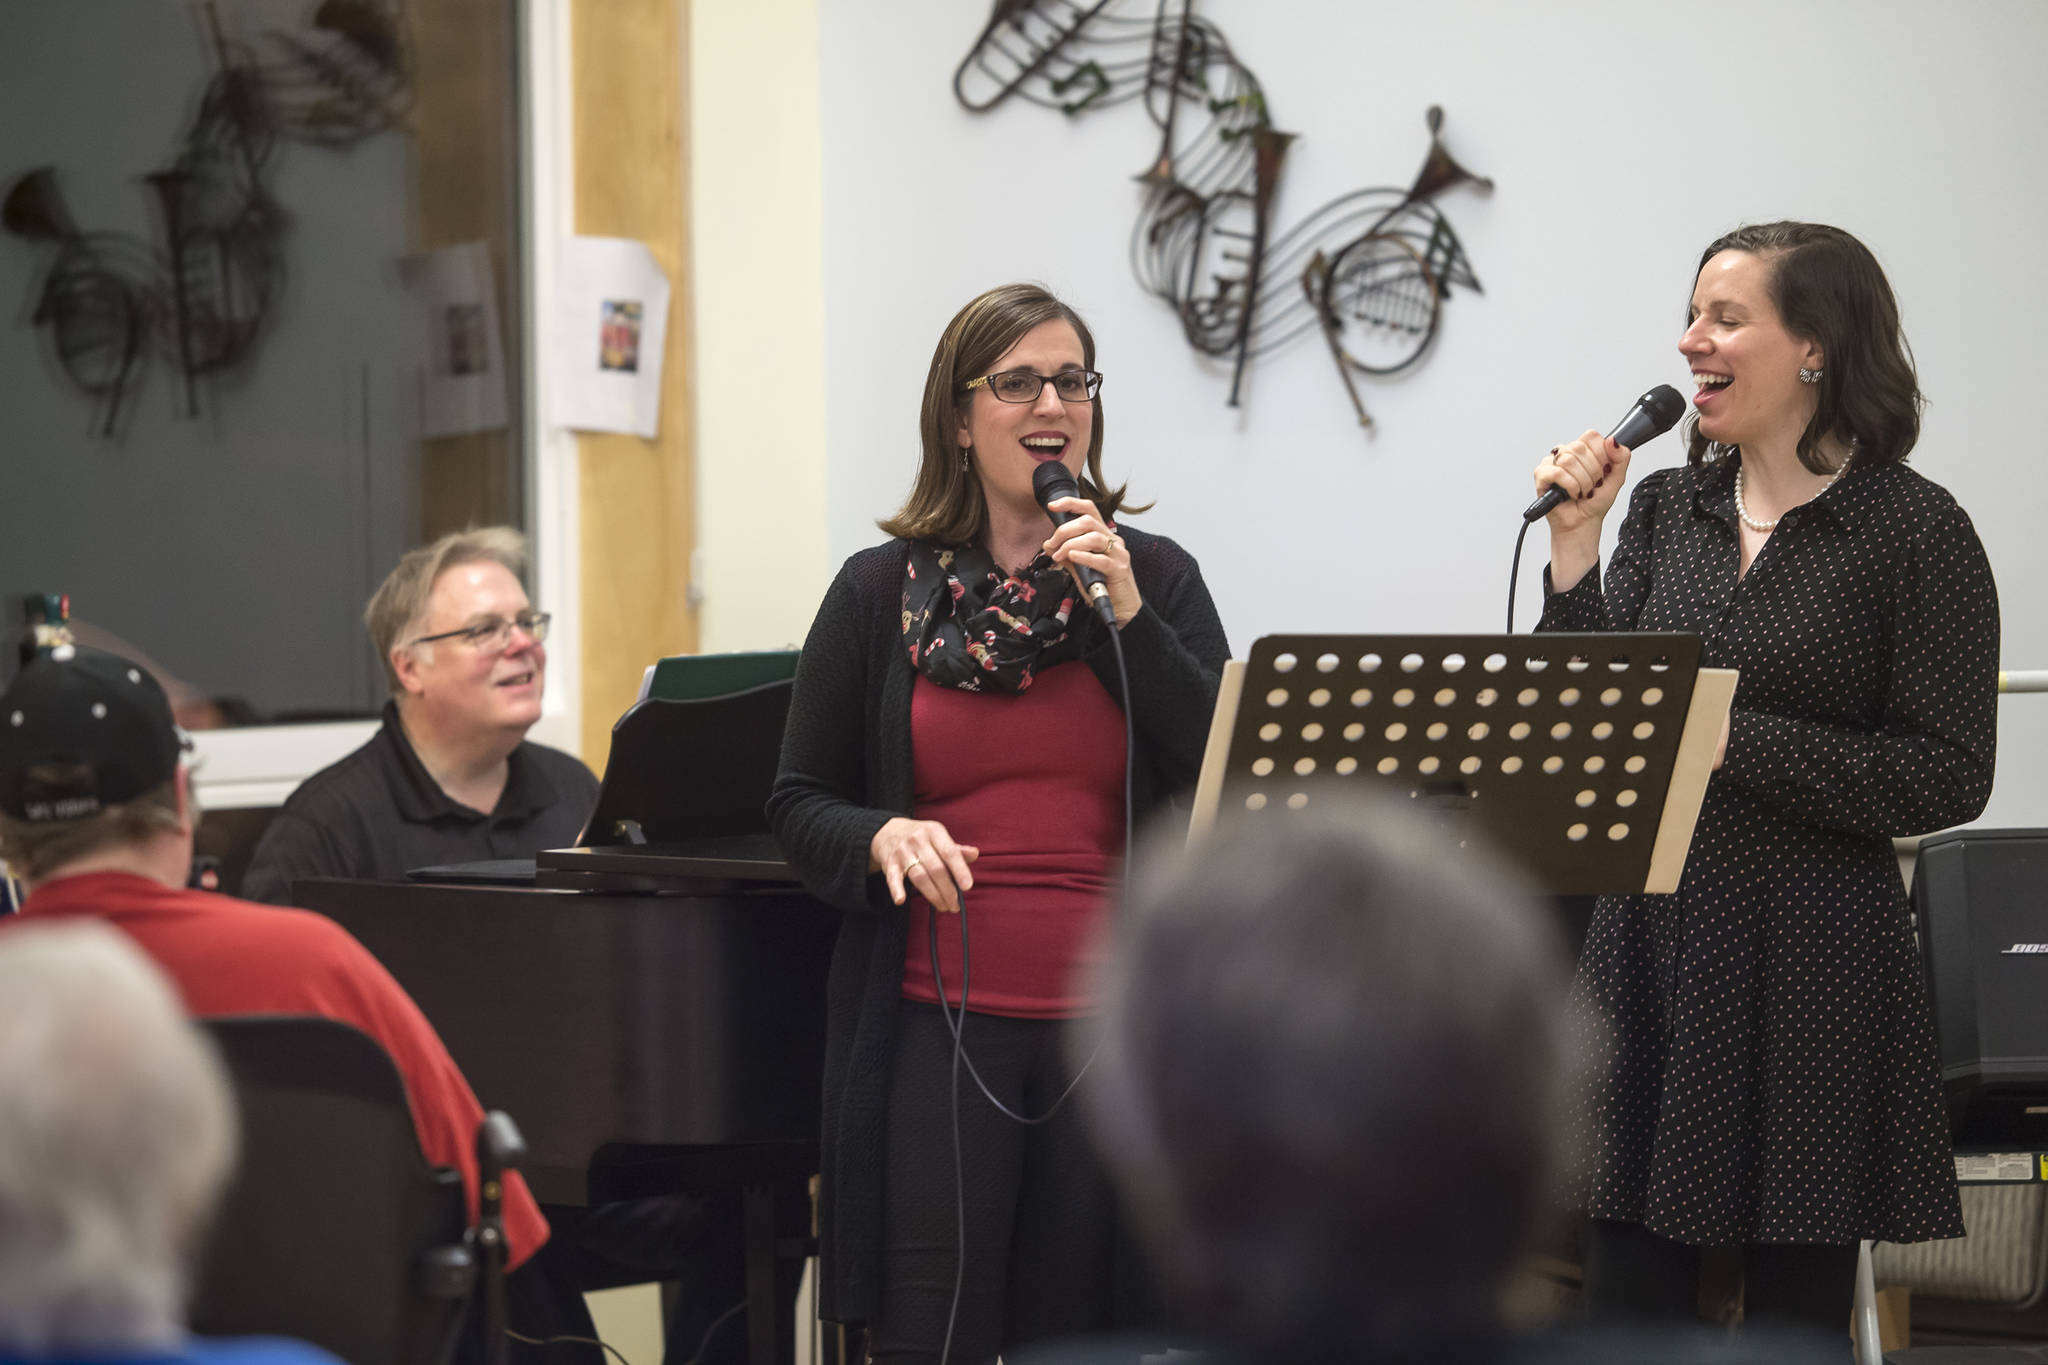 Heather Mitchell, center, and Allison Holtkamp are accompanied by Tom Locher on piano as they perform their Juneau Cabaret songs to seniors at Wildflower Court on Wednesday, Dec. 12, 2018.